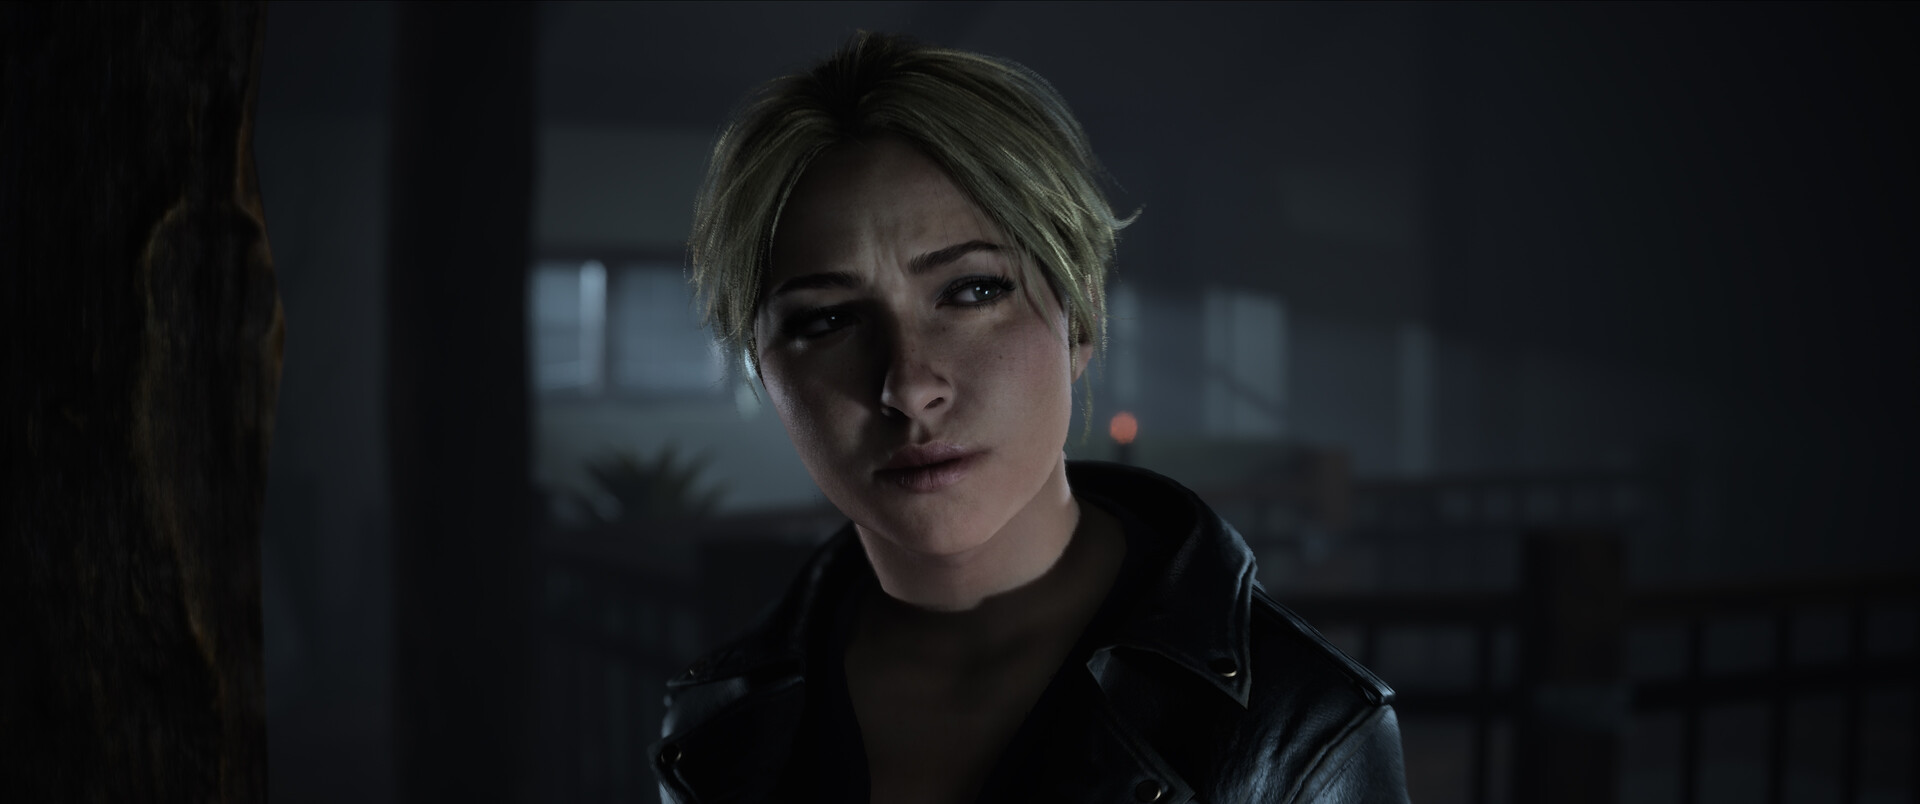 Until Dawn has been rebuilt in Unreal Engine 5 for PC and PlayStation 5